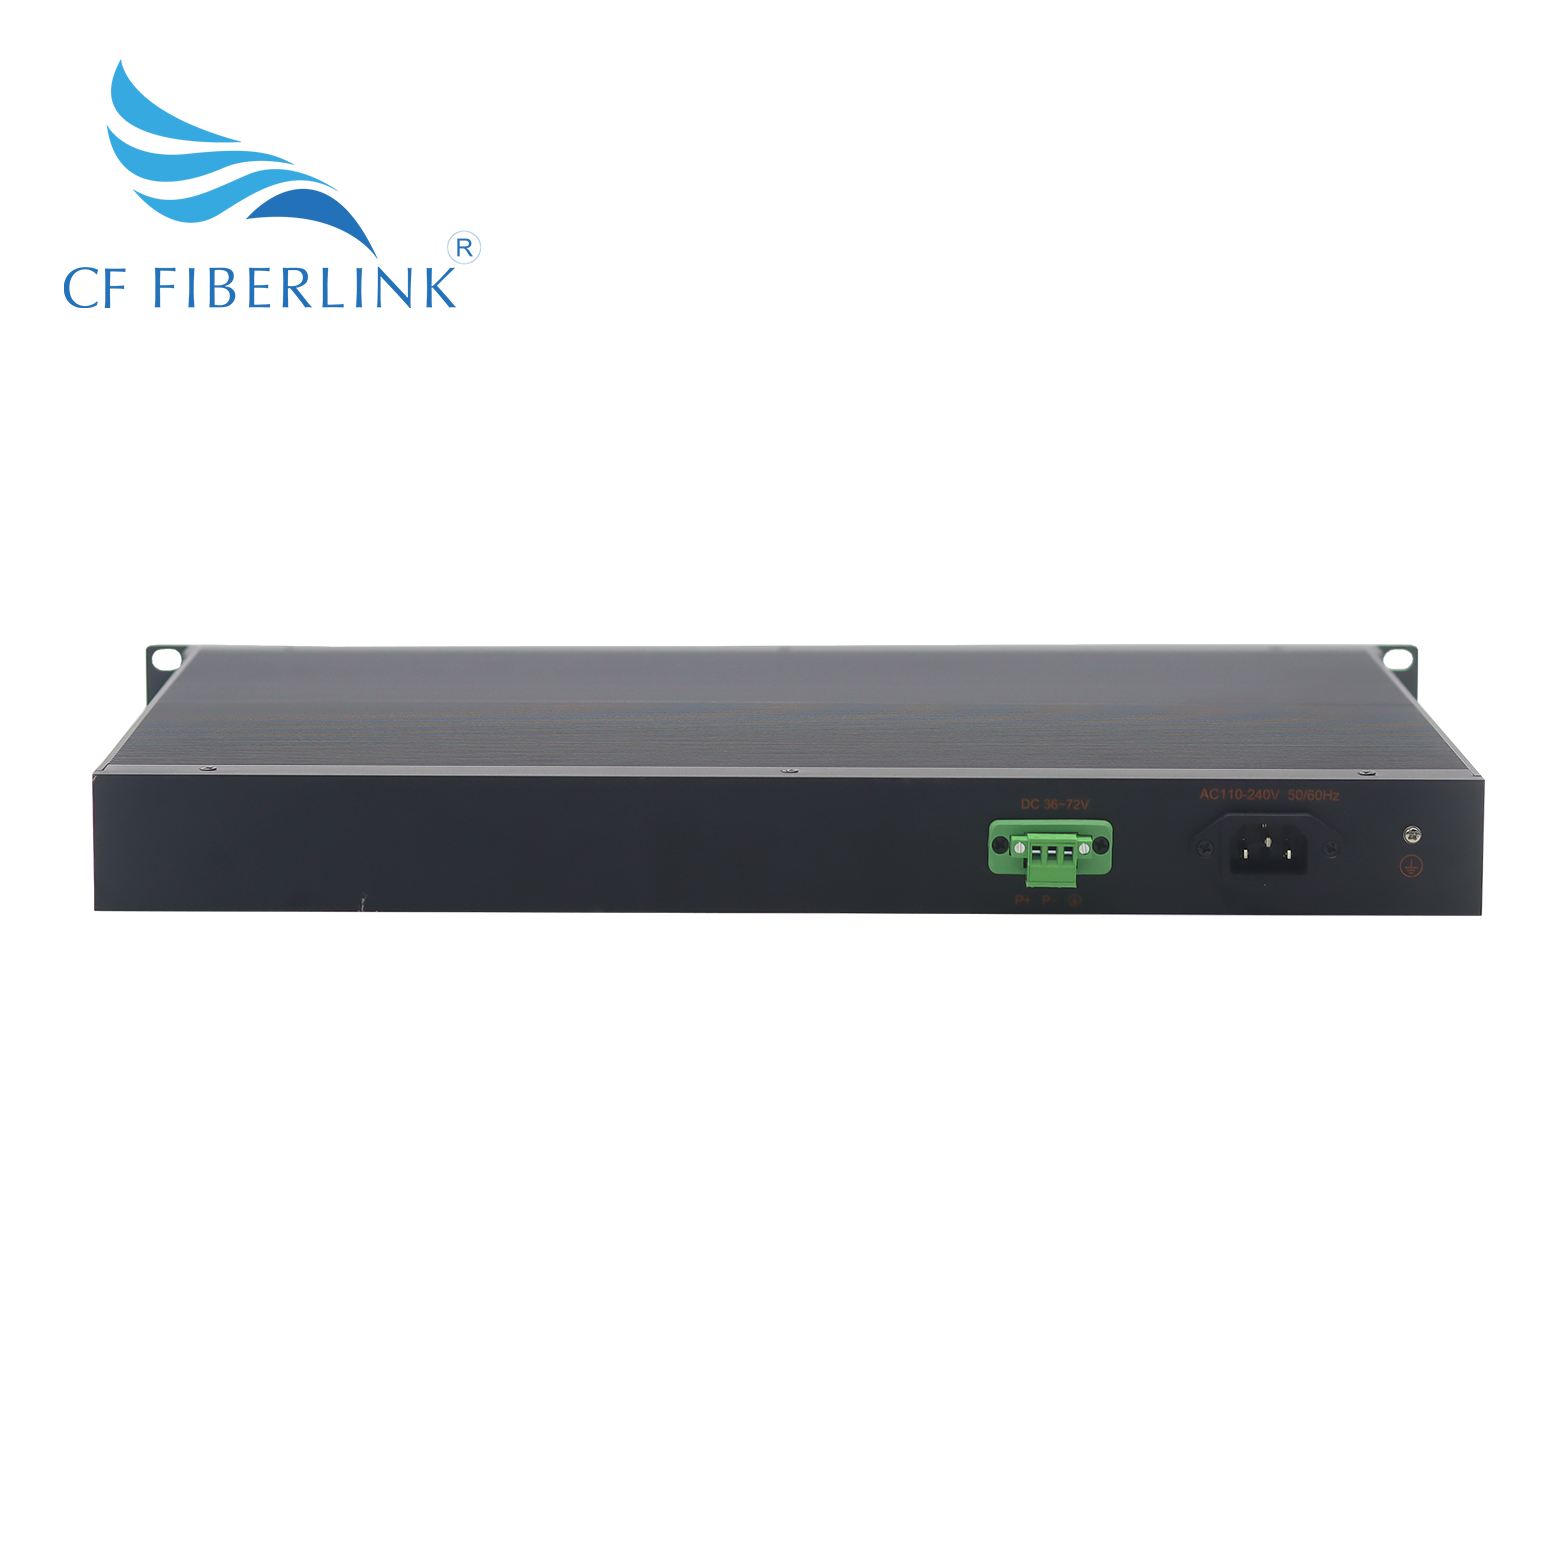 24 Gigabit + 8 Gigabit + 40 gigabit SFP + Ten thousand gigabit network pipe type rack type industrial convergence switch (CF-HY4T2408G-SFP )